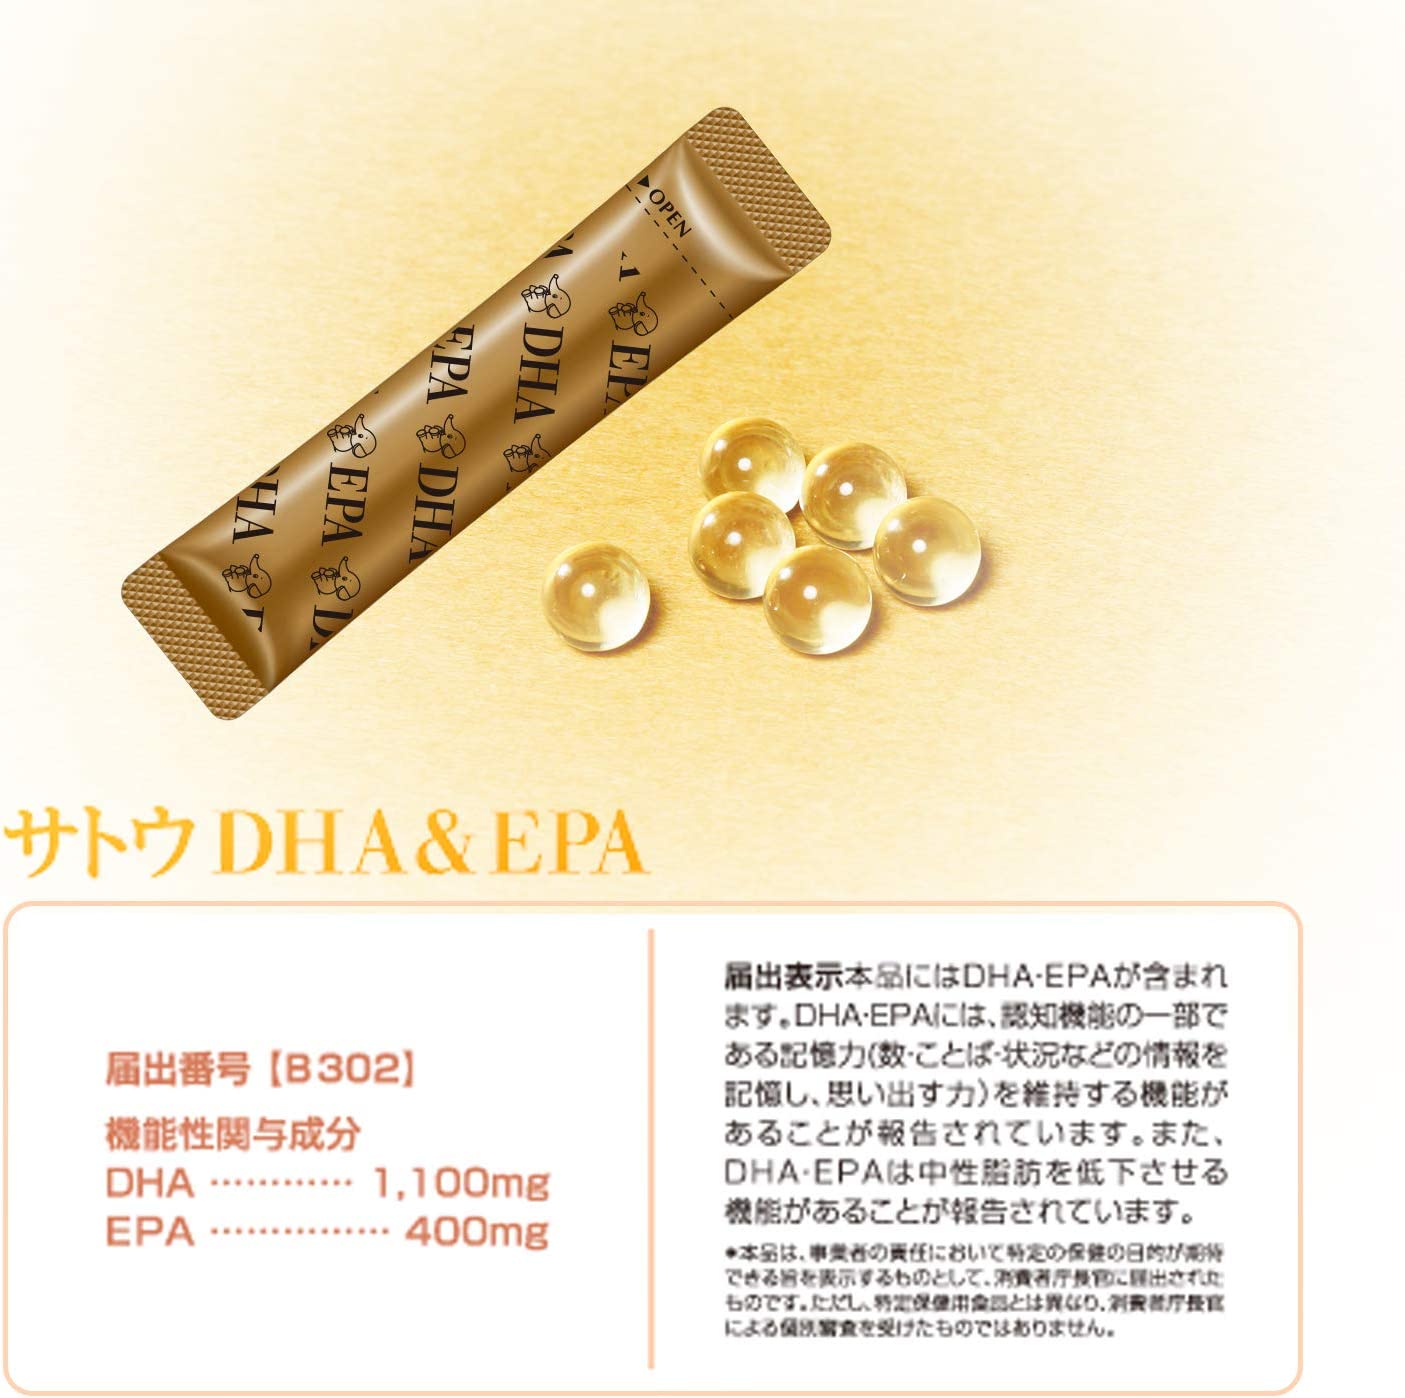 Sato DHA & EPA 20 packets (about 10 days) ｜ DOKODEMO